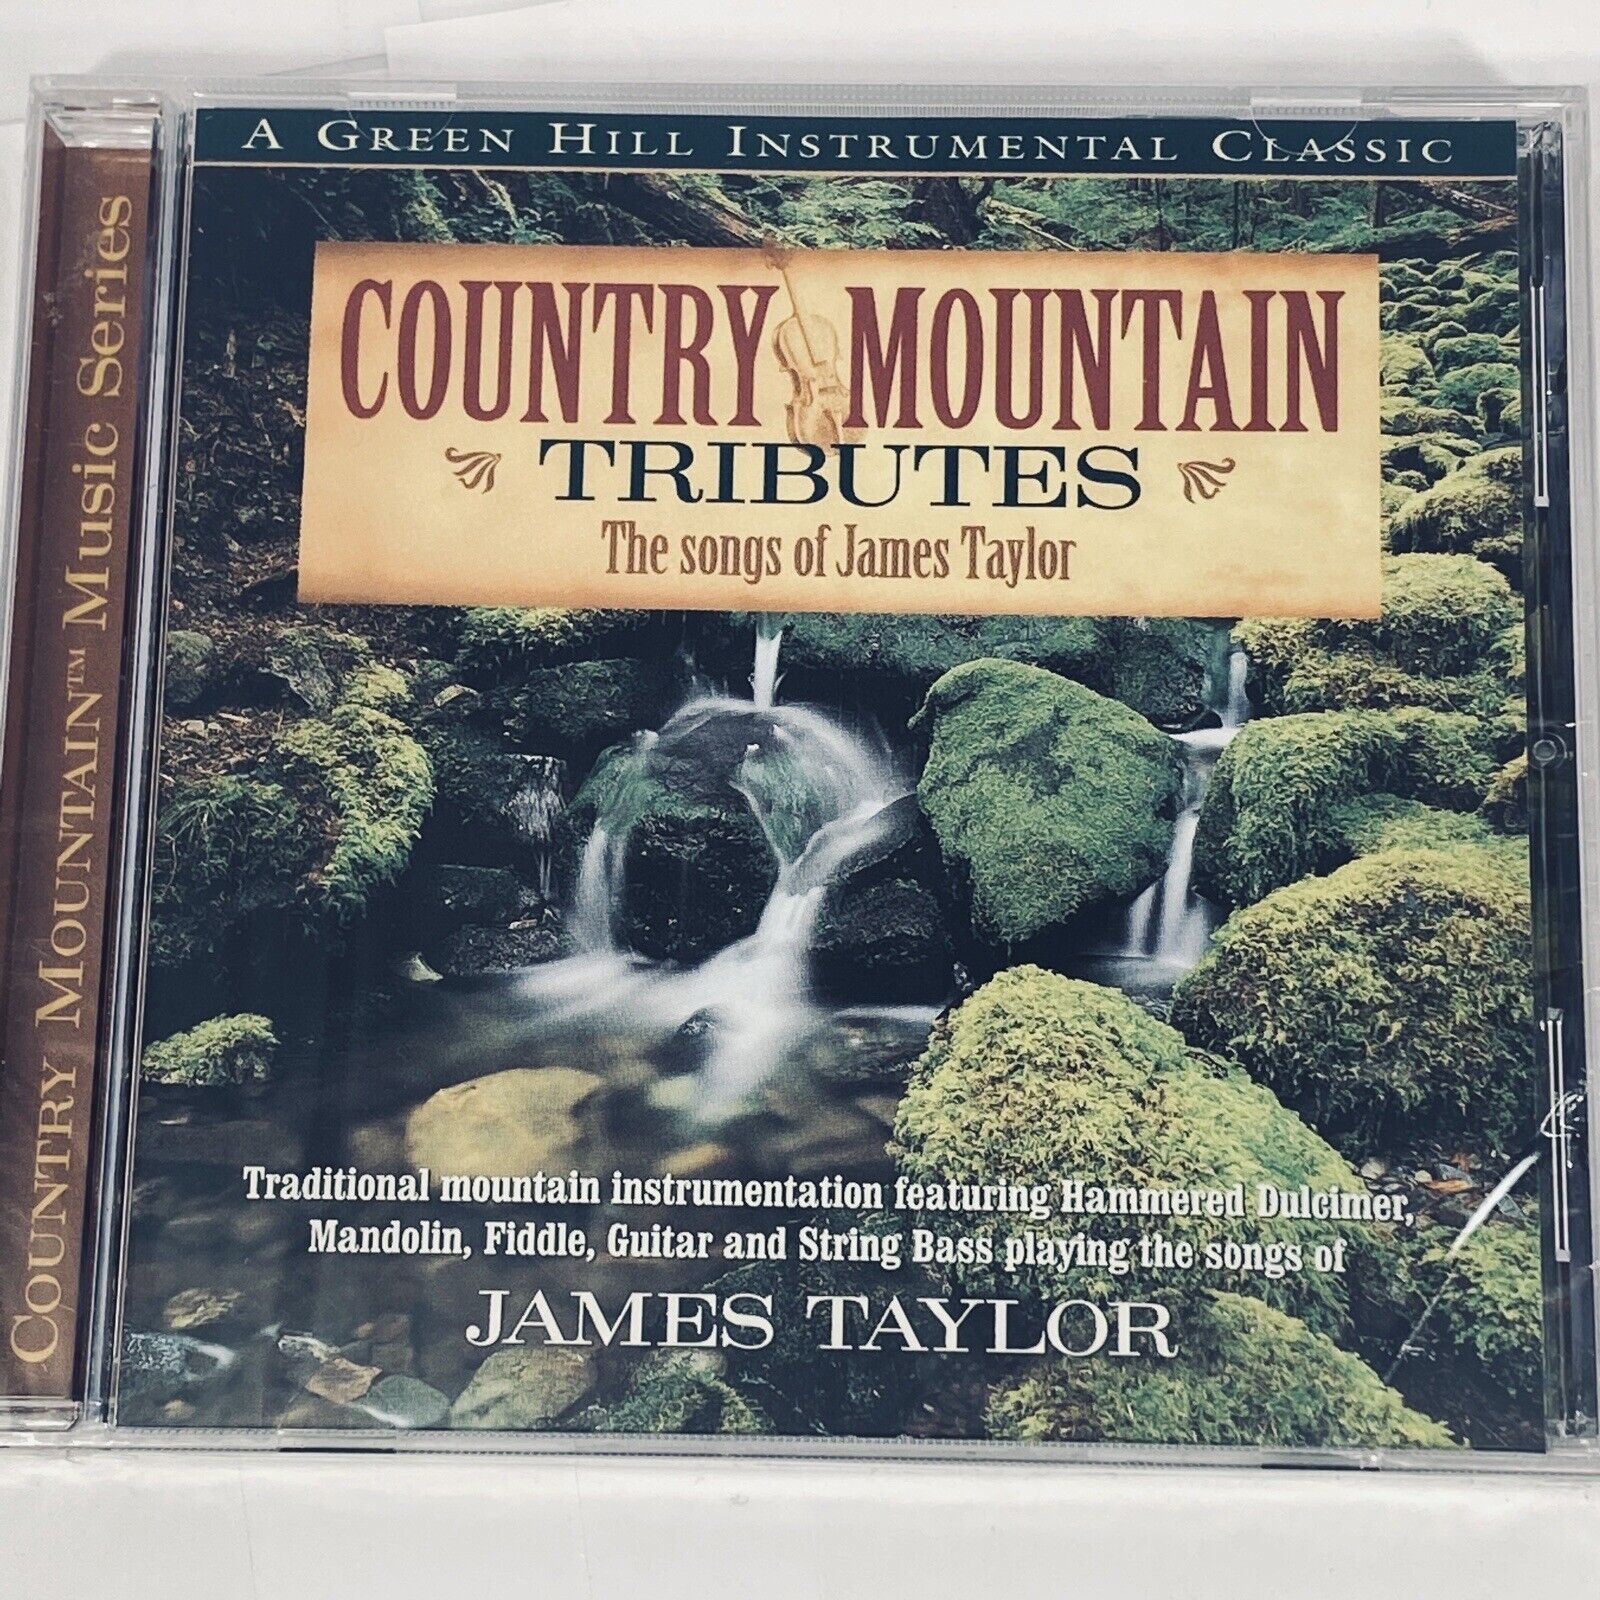 CRAIG DUNCAN, COUNTRY MOUNTAIN TRIBUTES, SONGS OF JAMES TAYLOR,  CD - SEALED